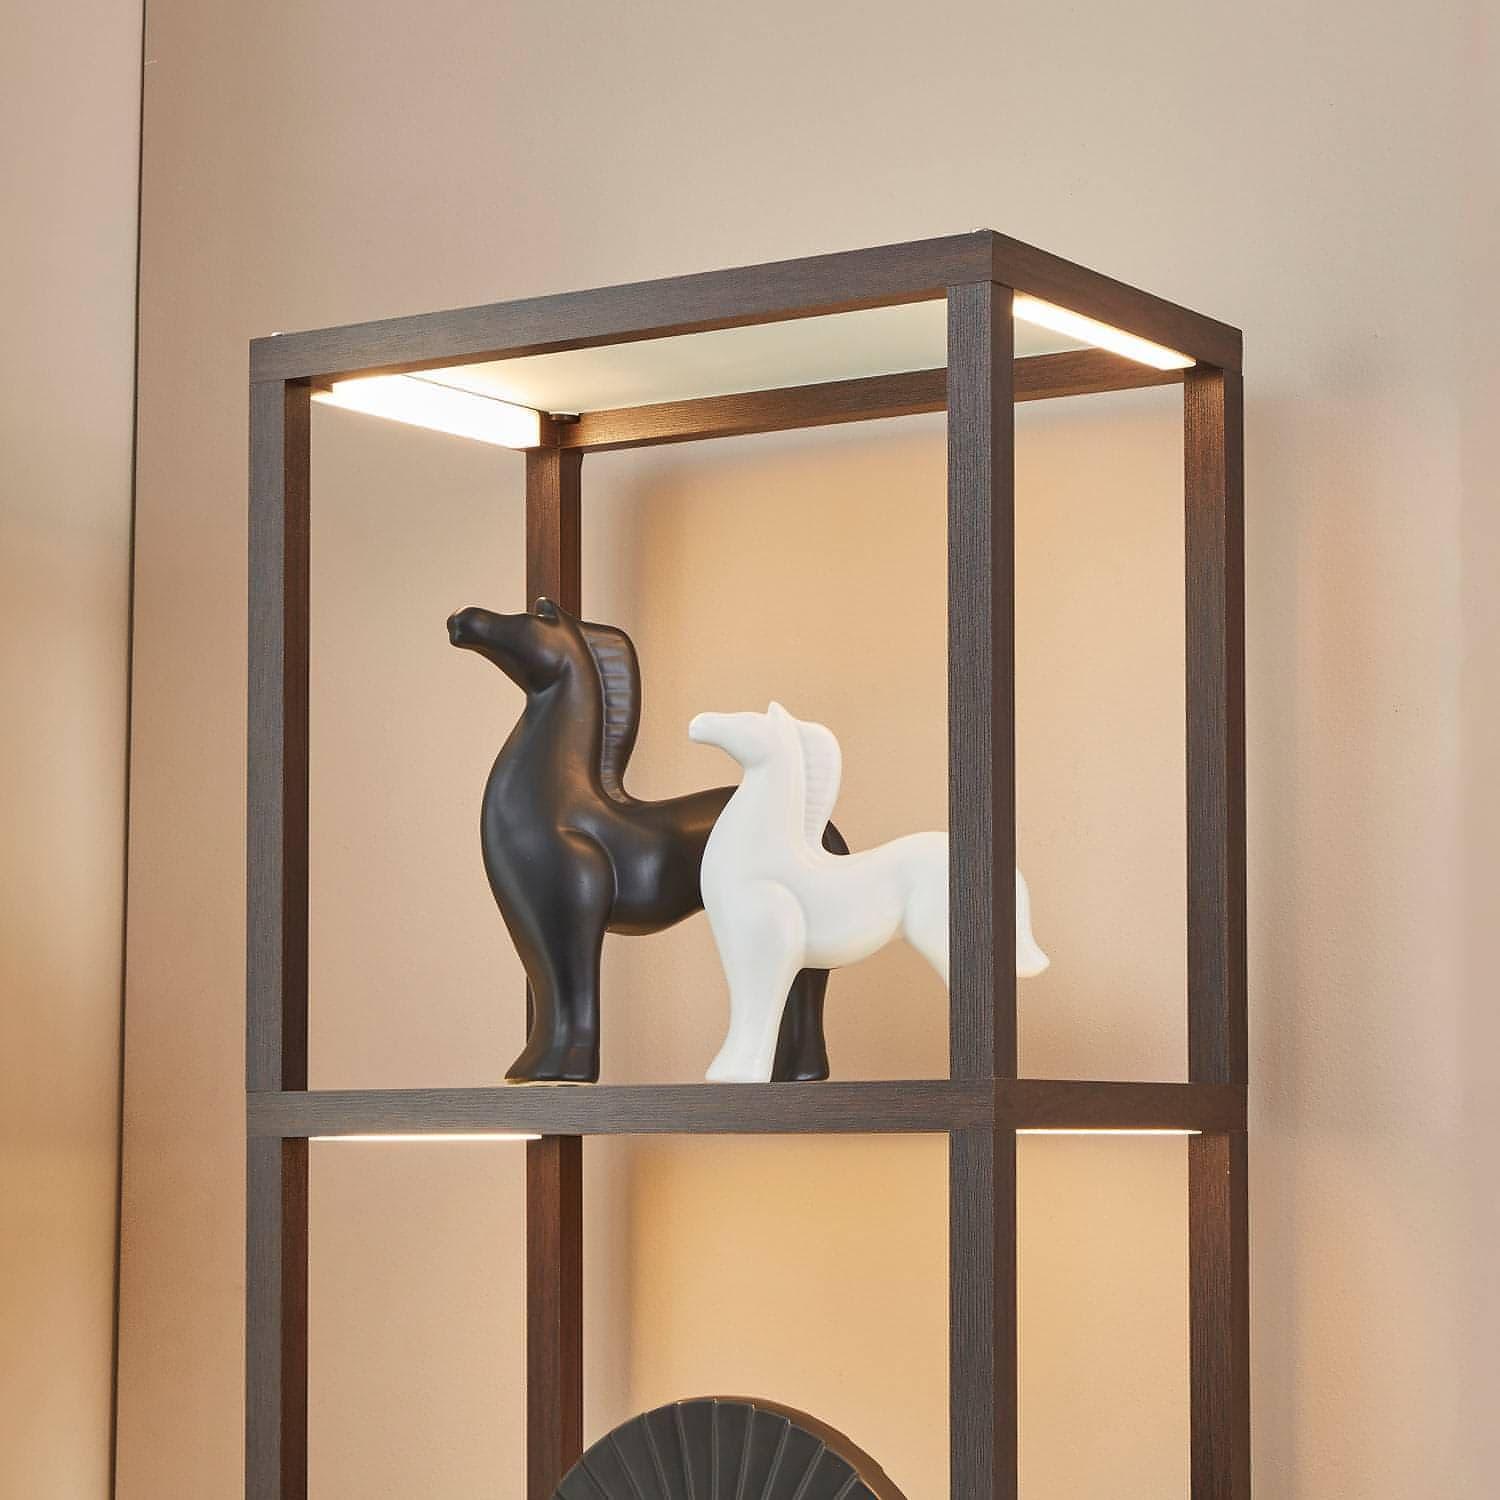 FENLO Fantasy Plus Glass Display Shelves with Dimmable LED Lights